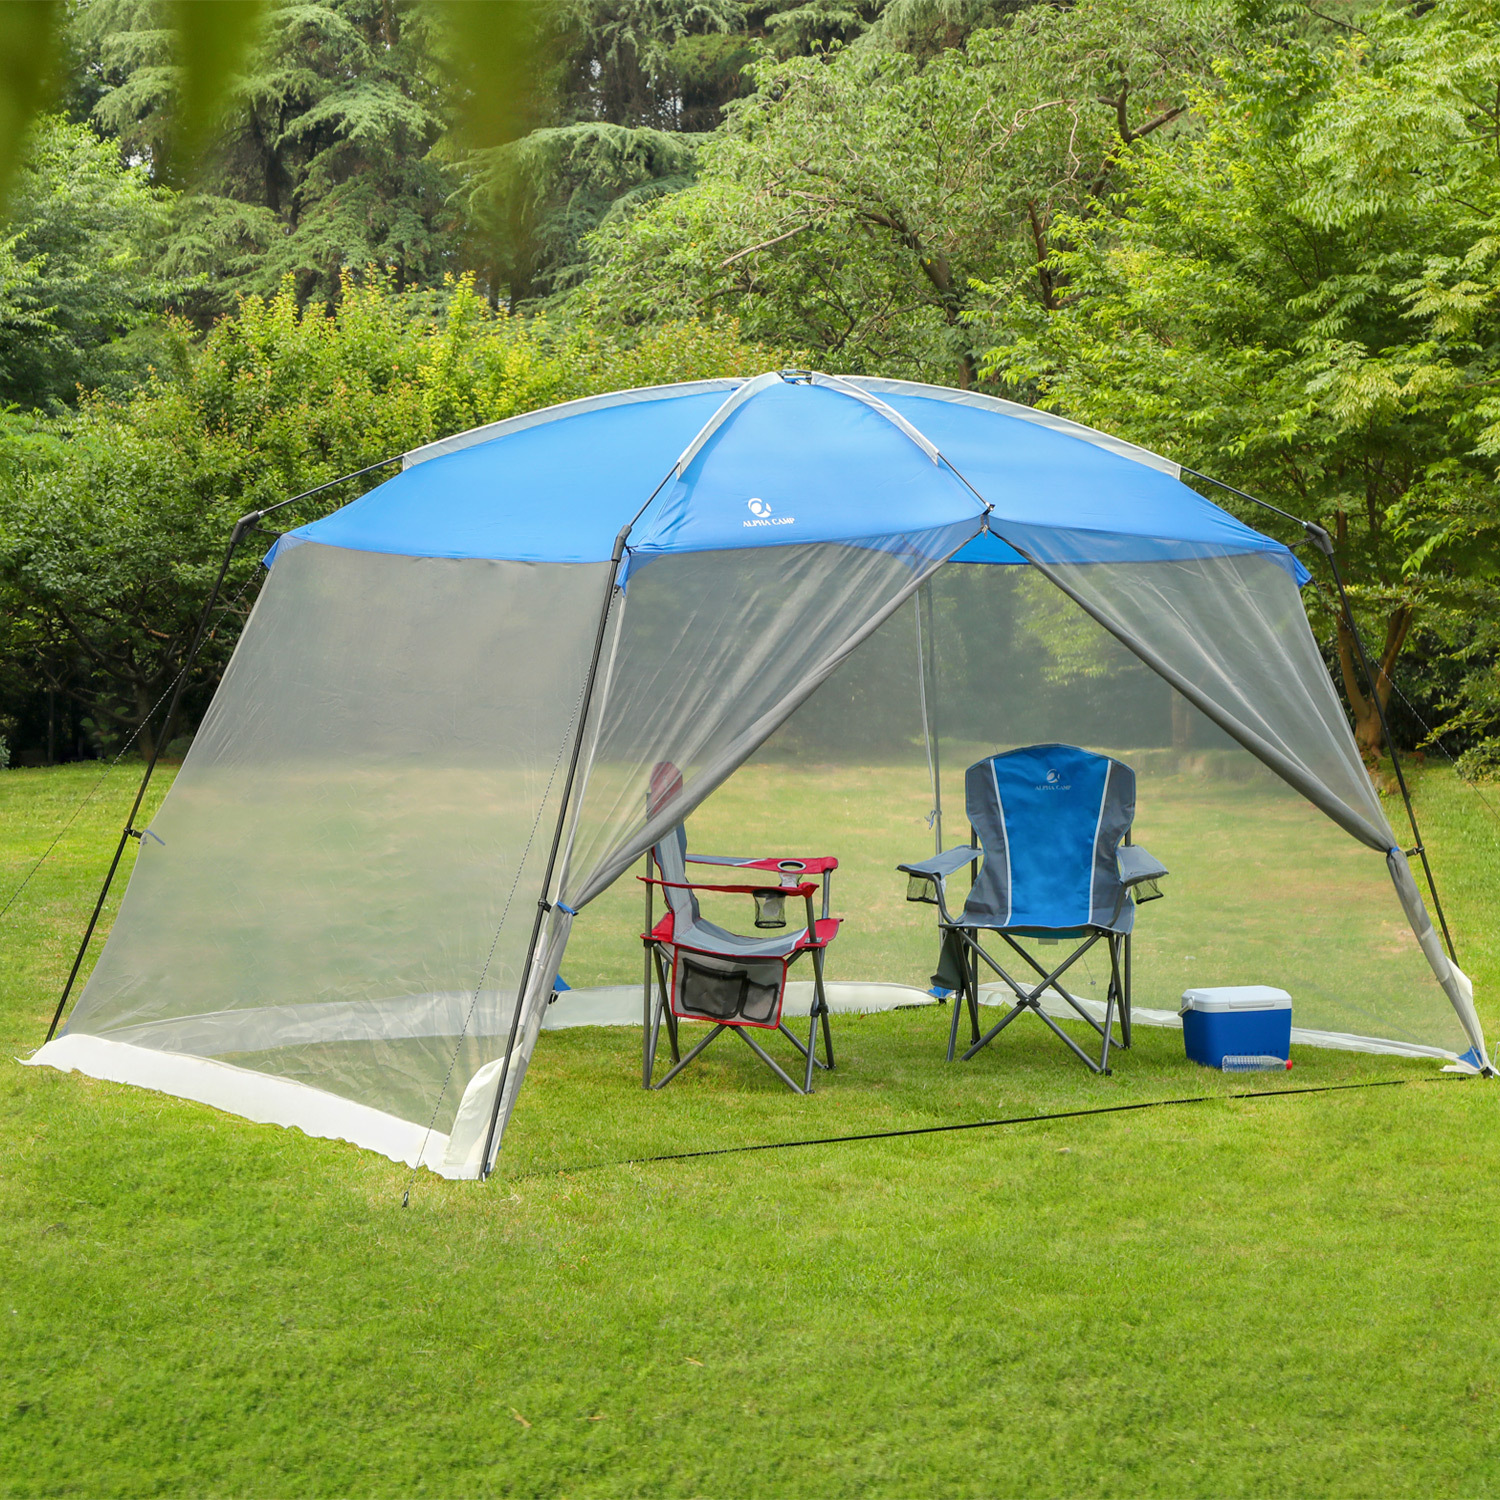 Alpha Camper 13' x 9' Screen House Canopy Sun Shade with One Room, Blue - image 4 of 9